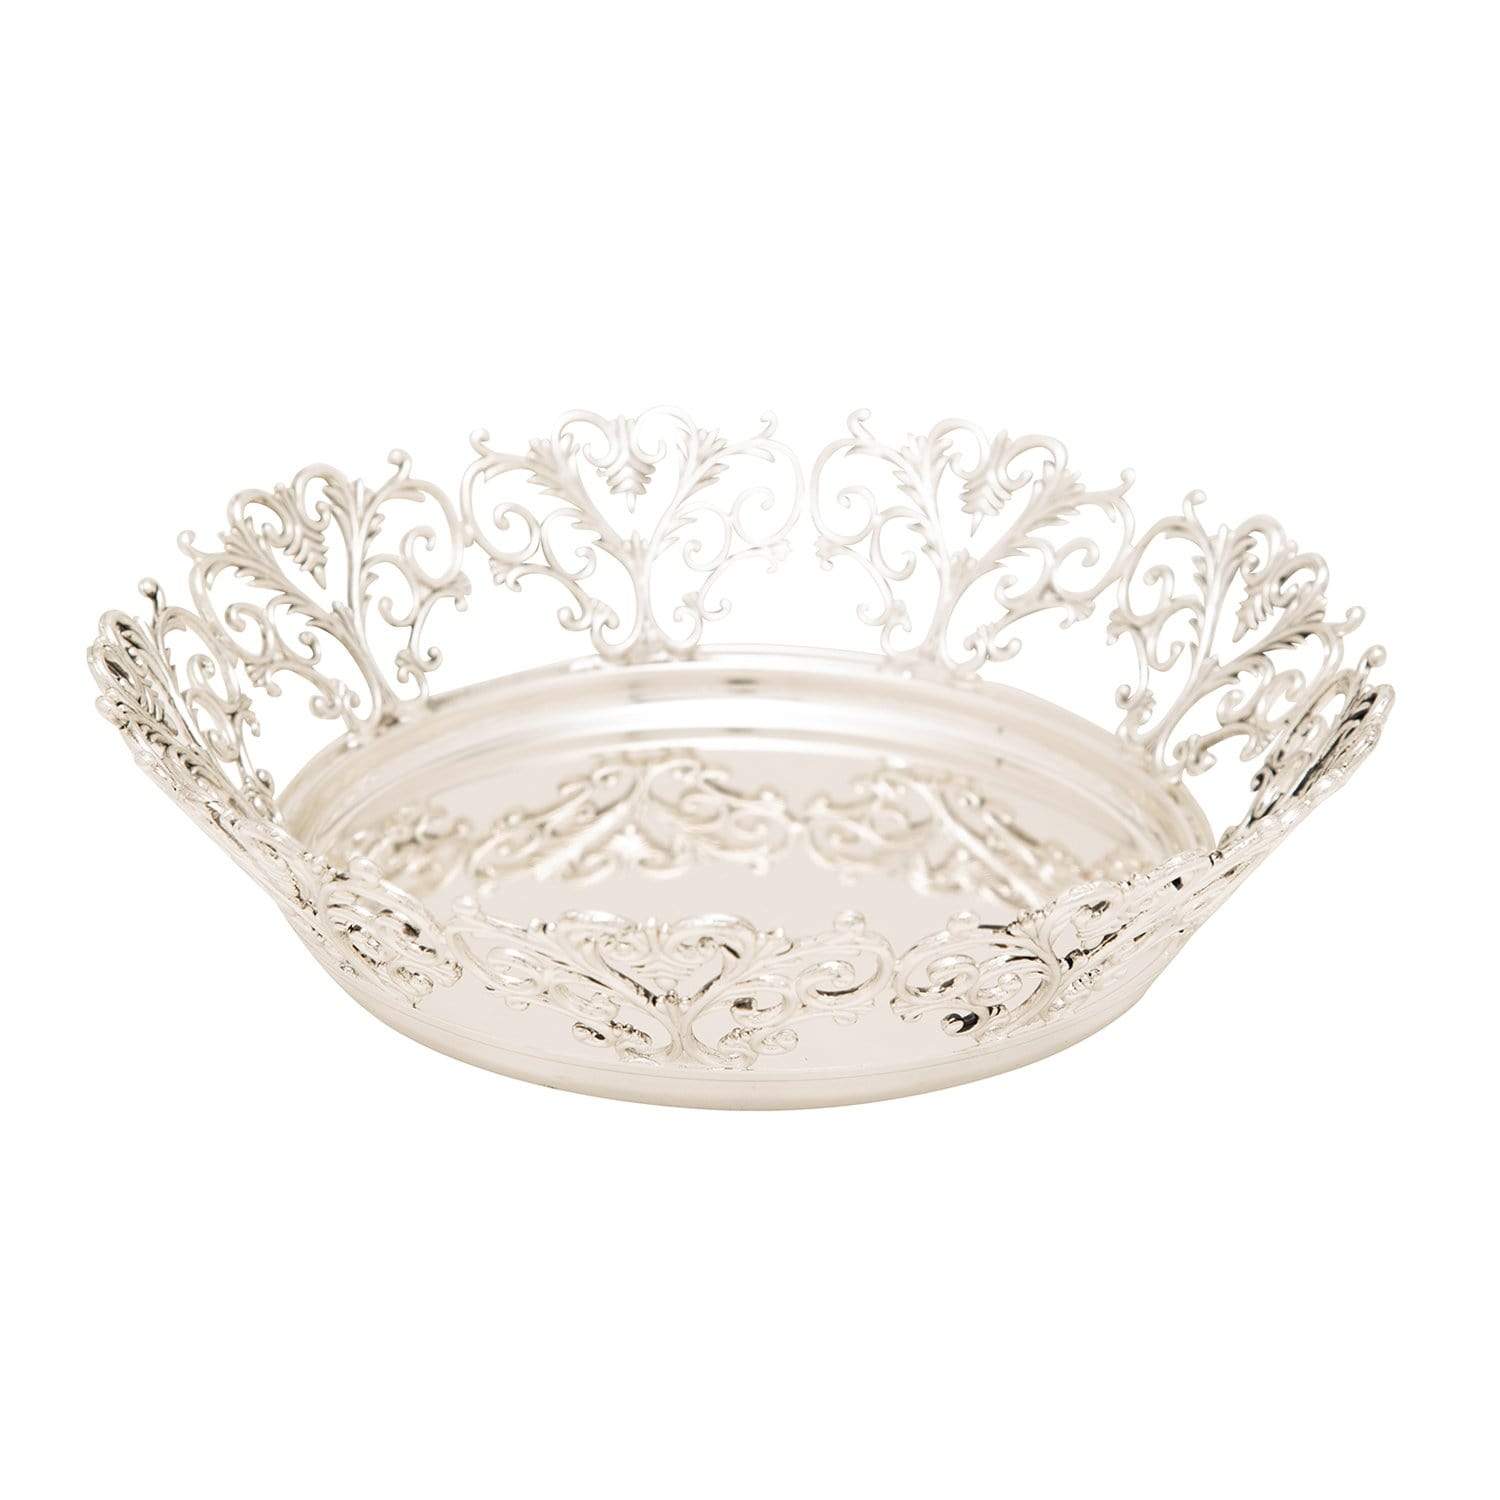 SILVER PLATED ROUND BOWL